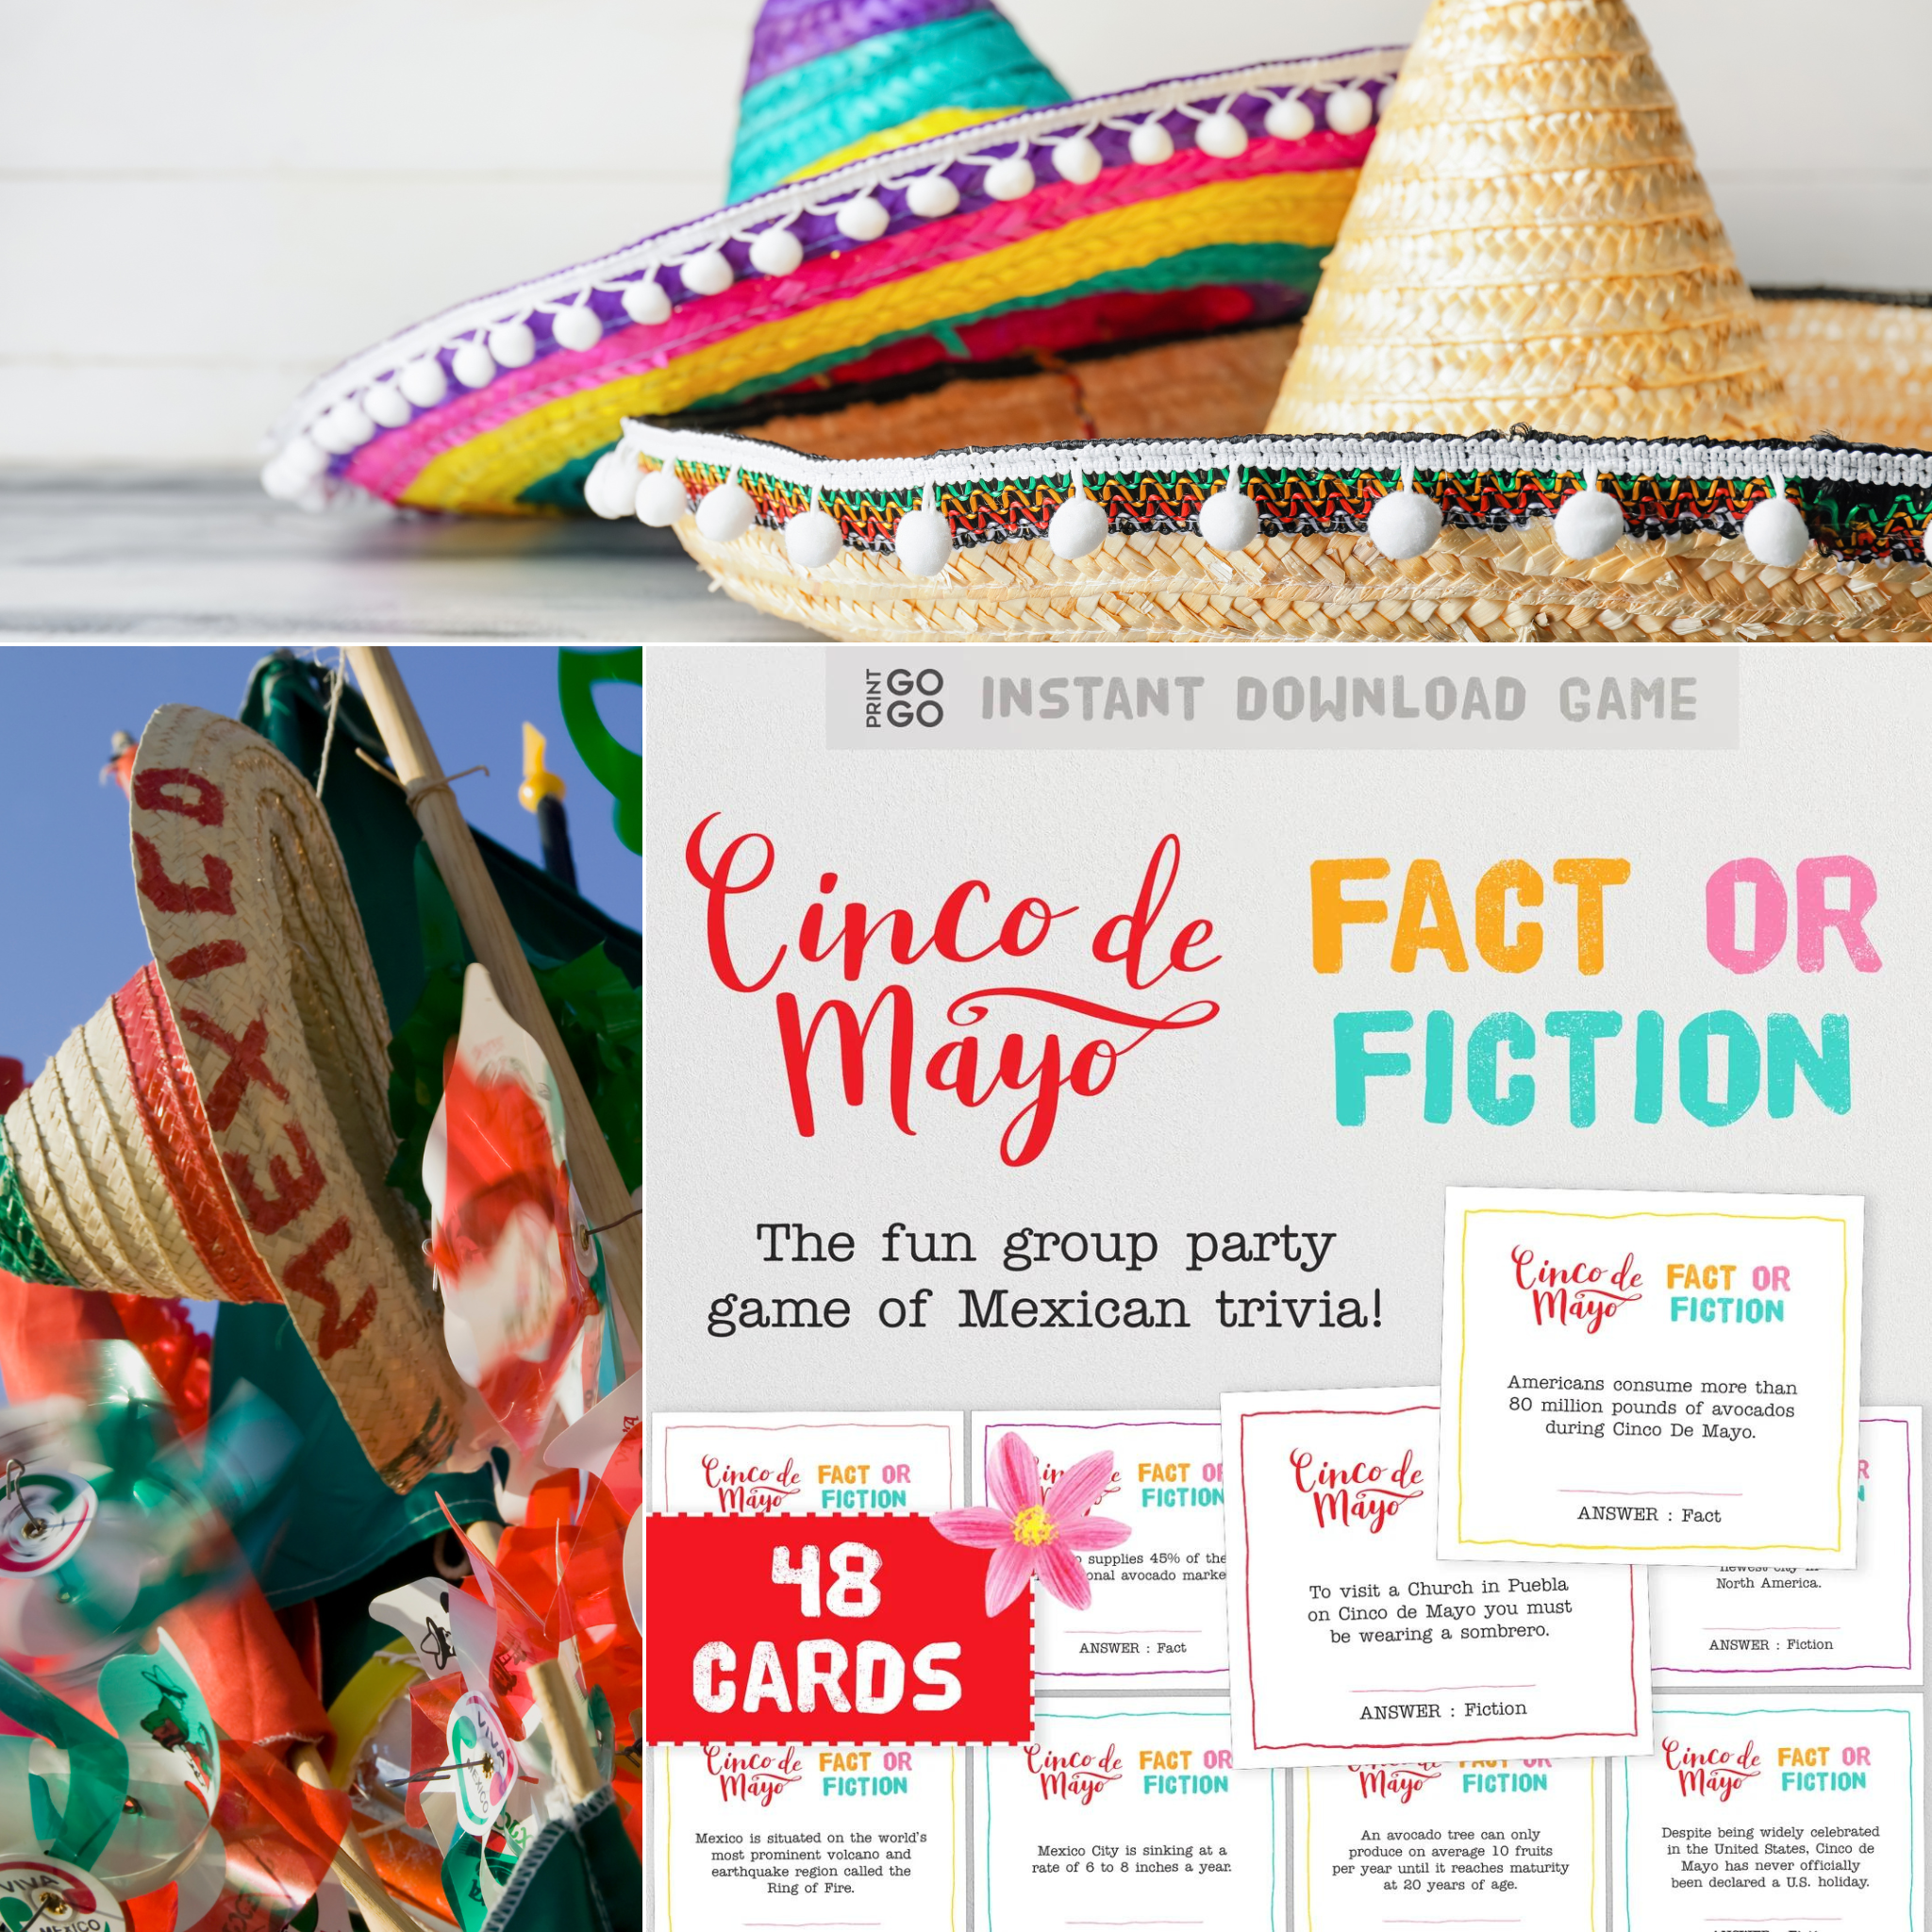 Put the Fiesta in Fact or Fiction this Cinco de Mayo!